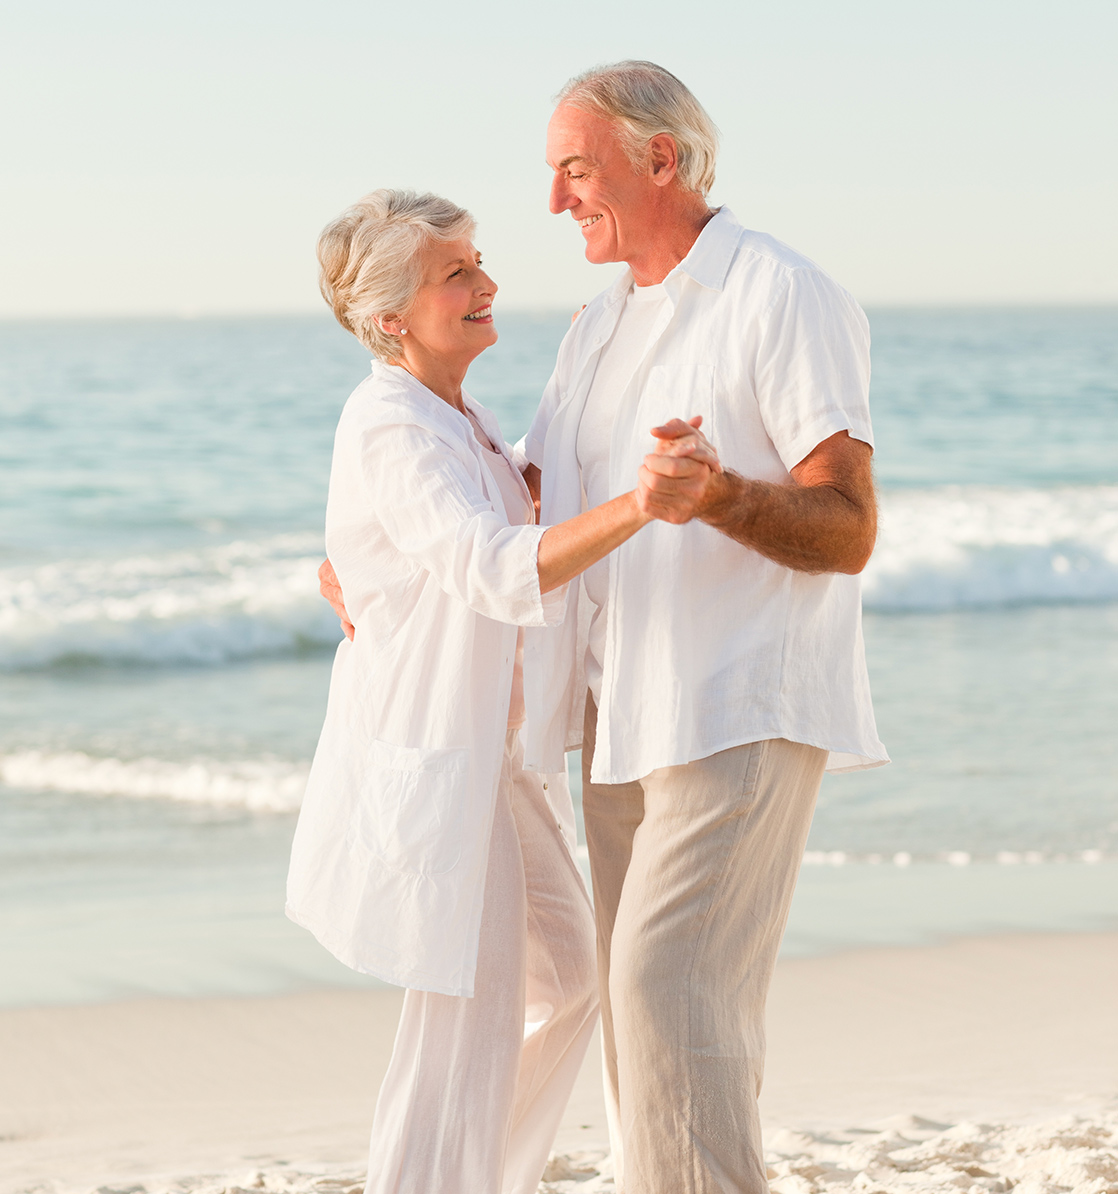 senior couple smiling and dancing on beach fixed index annuity rates lifelong financial solutions